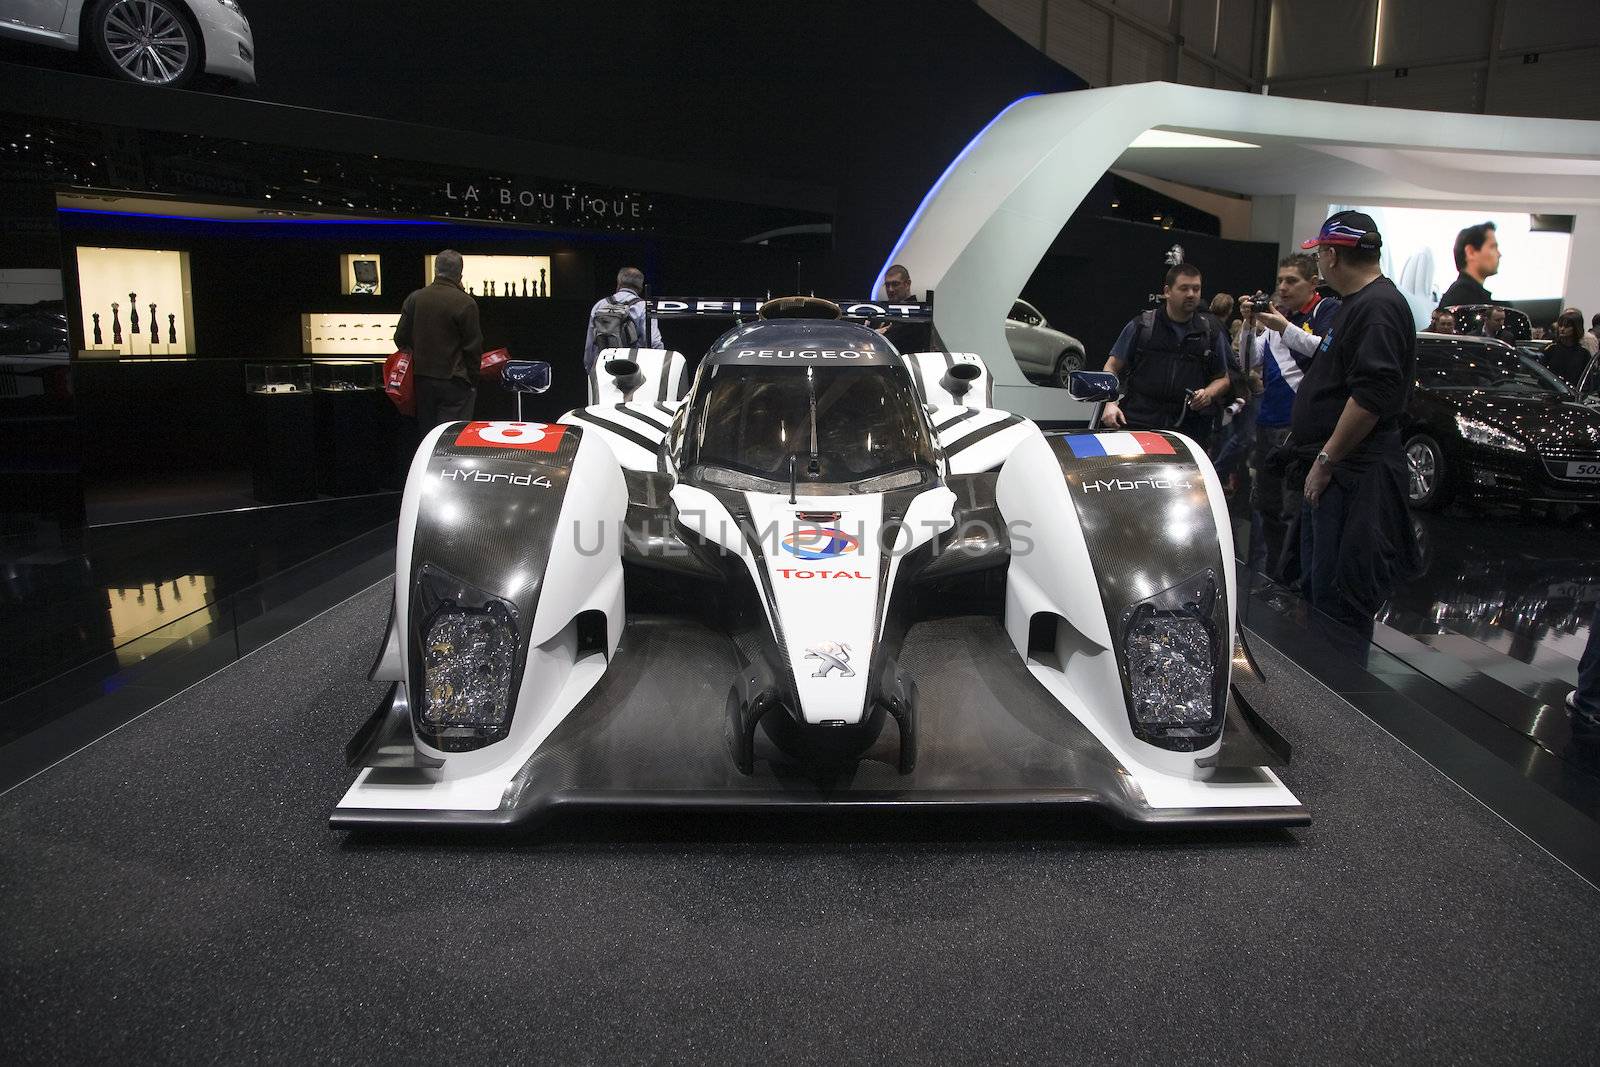 GENEVA, SWITZERLAND - MARCH 4, 2011 - Peugeot 908 Hybrid4 is presented at the annual motor show in Geneva on March 4, 2011.  This is Peugeot's entry for the 2011 edition of the 24 hour Le Mans race.  The car recovers and stores the kinetic energy generated when braking, and feeds it back into the driveline during acceleration.